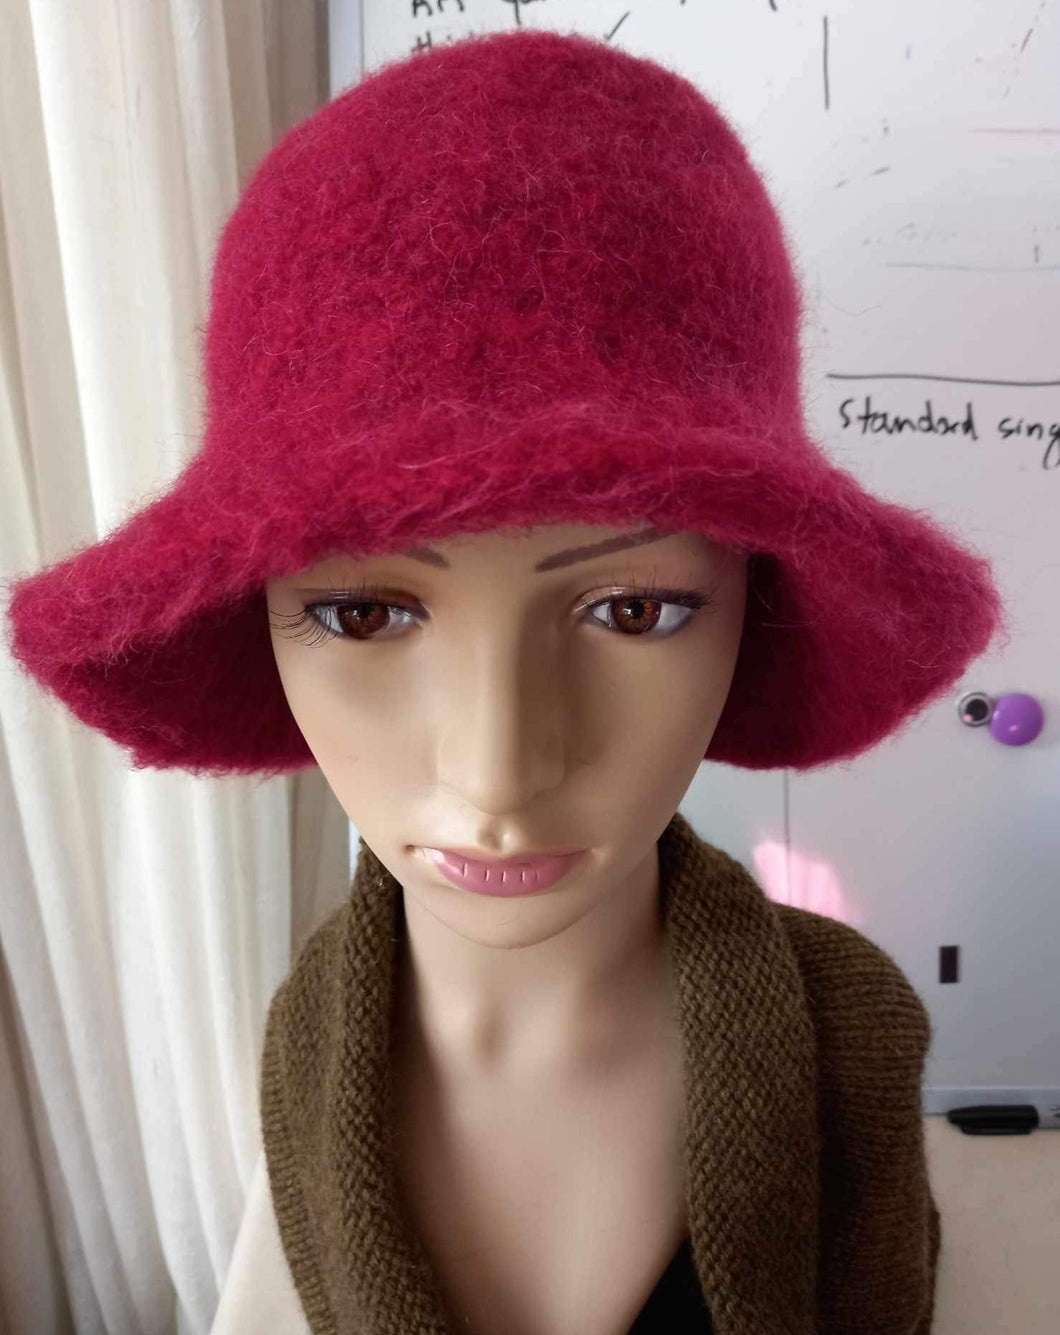 100% Wool Felted Hat - Hot Pink with Art Yarn